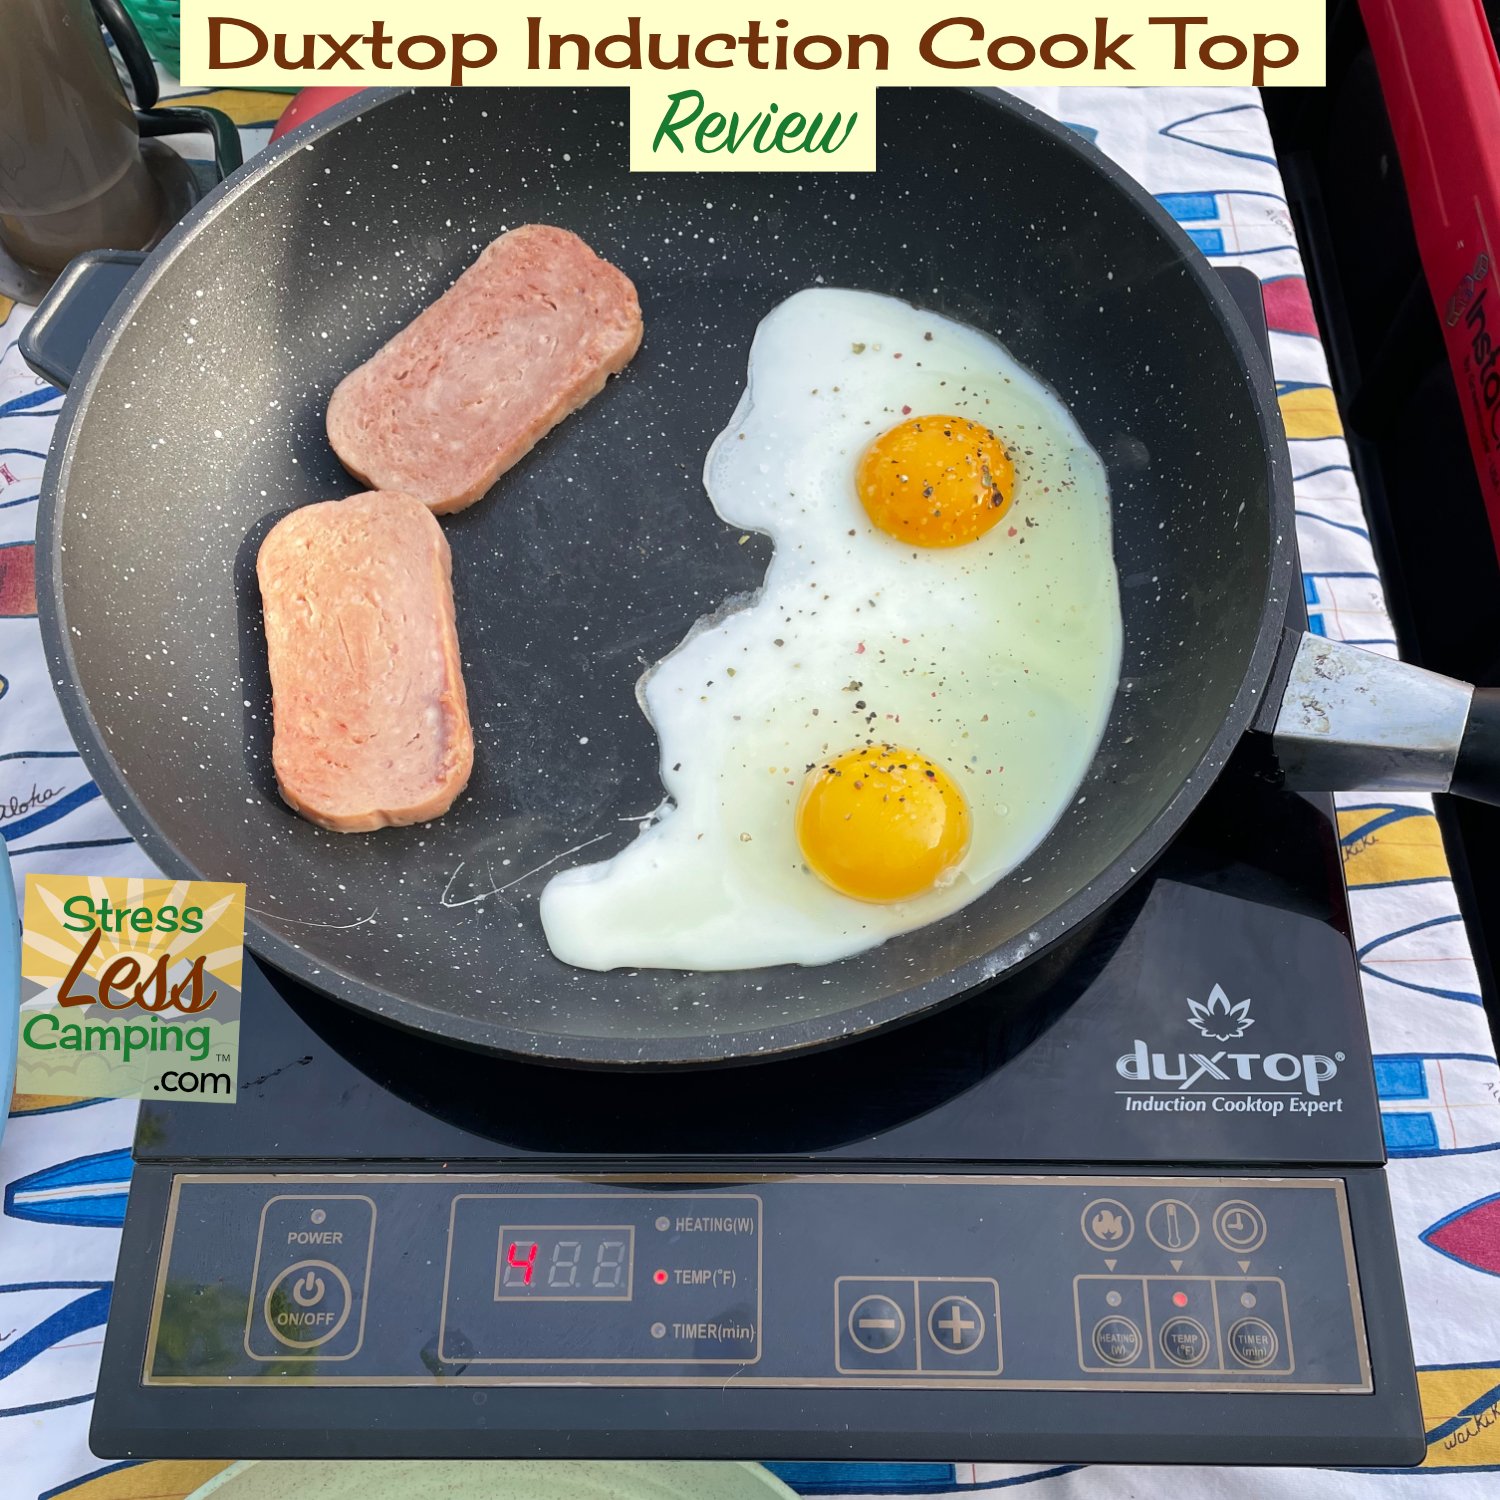 Duxtop induction cook top for campers